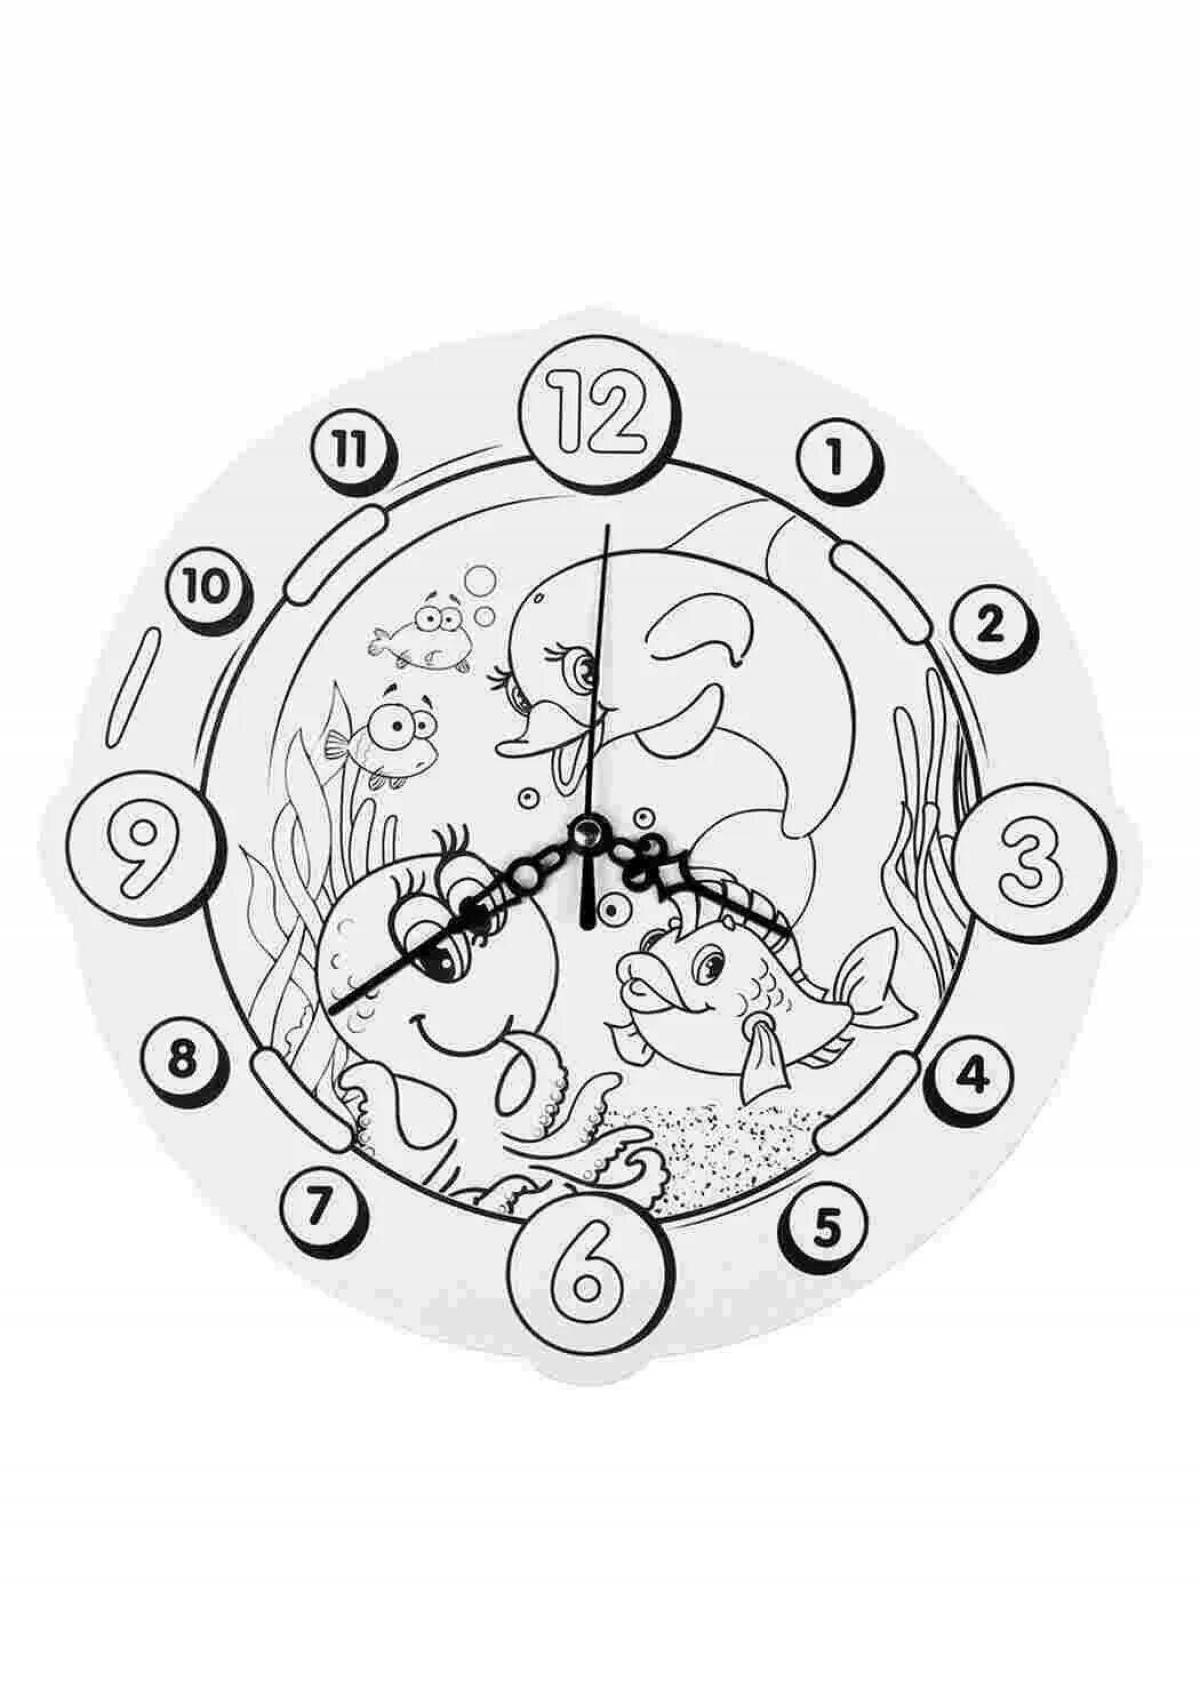 Glittering wall clock coloring page